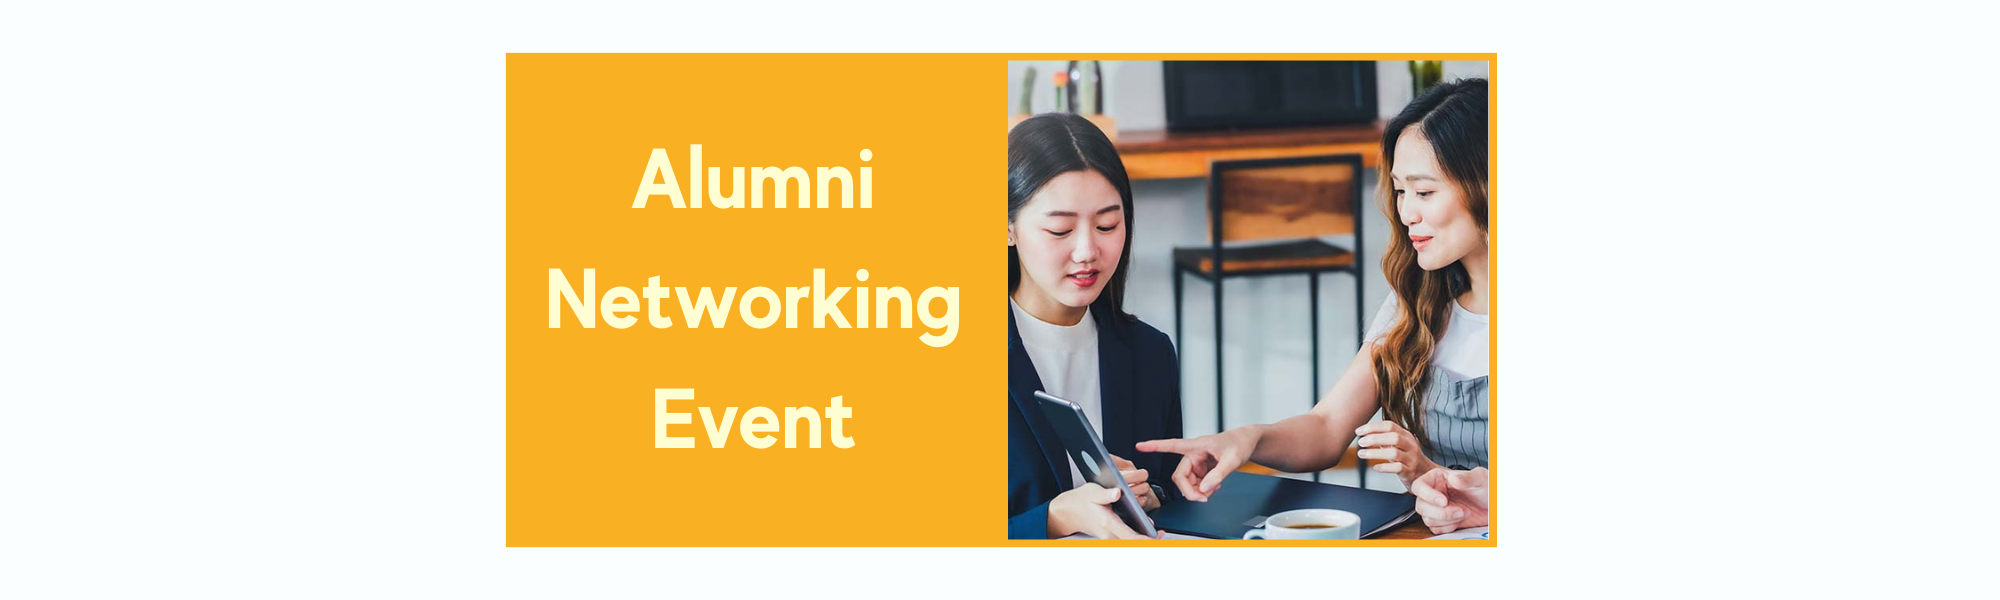 Alumni-Networking-Event.png